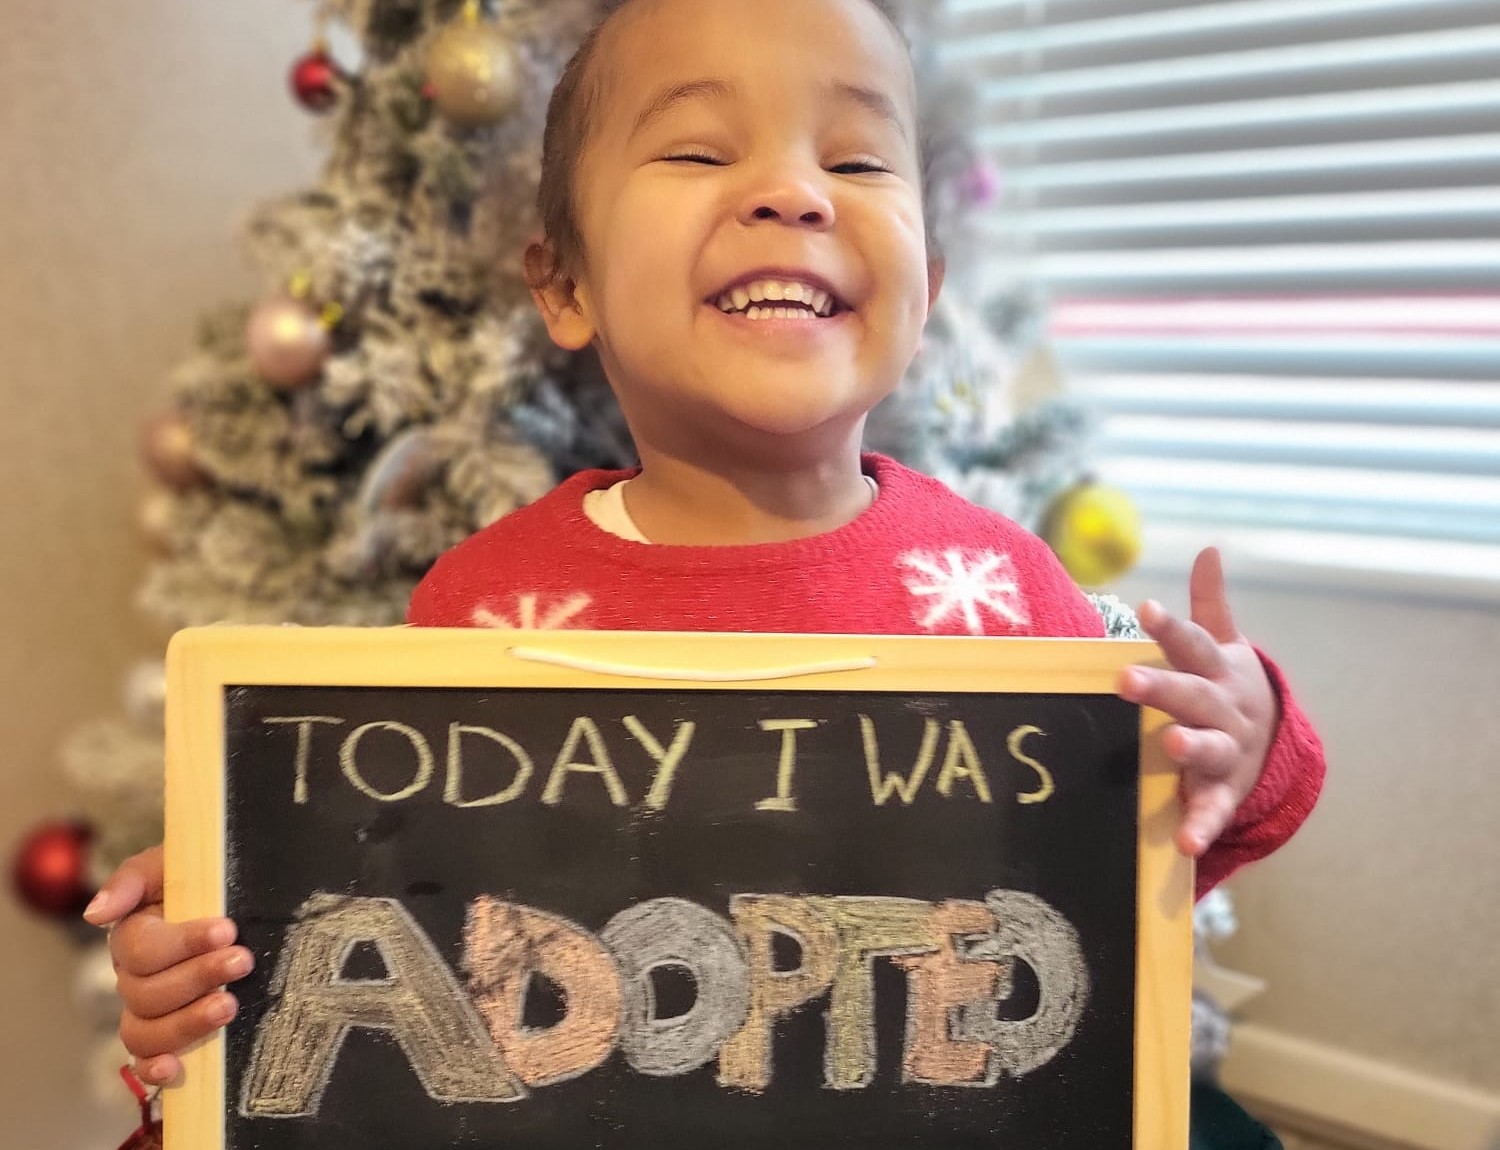 Shirley, from foster child to adopted daughter